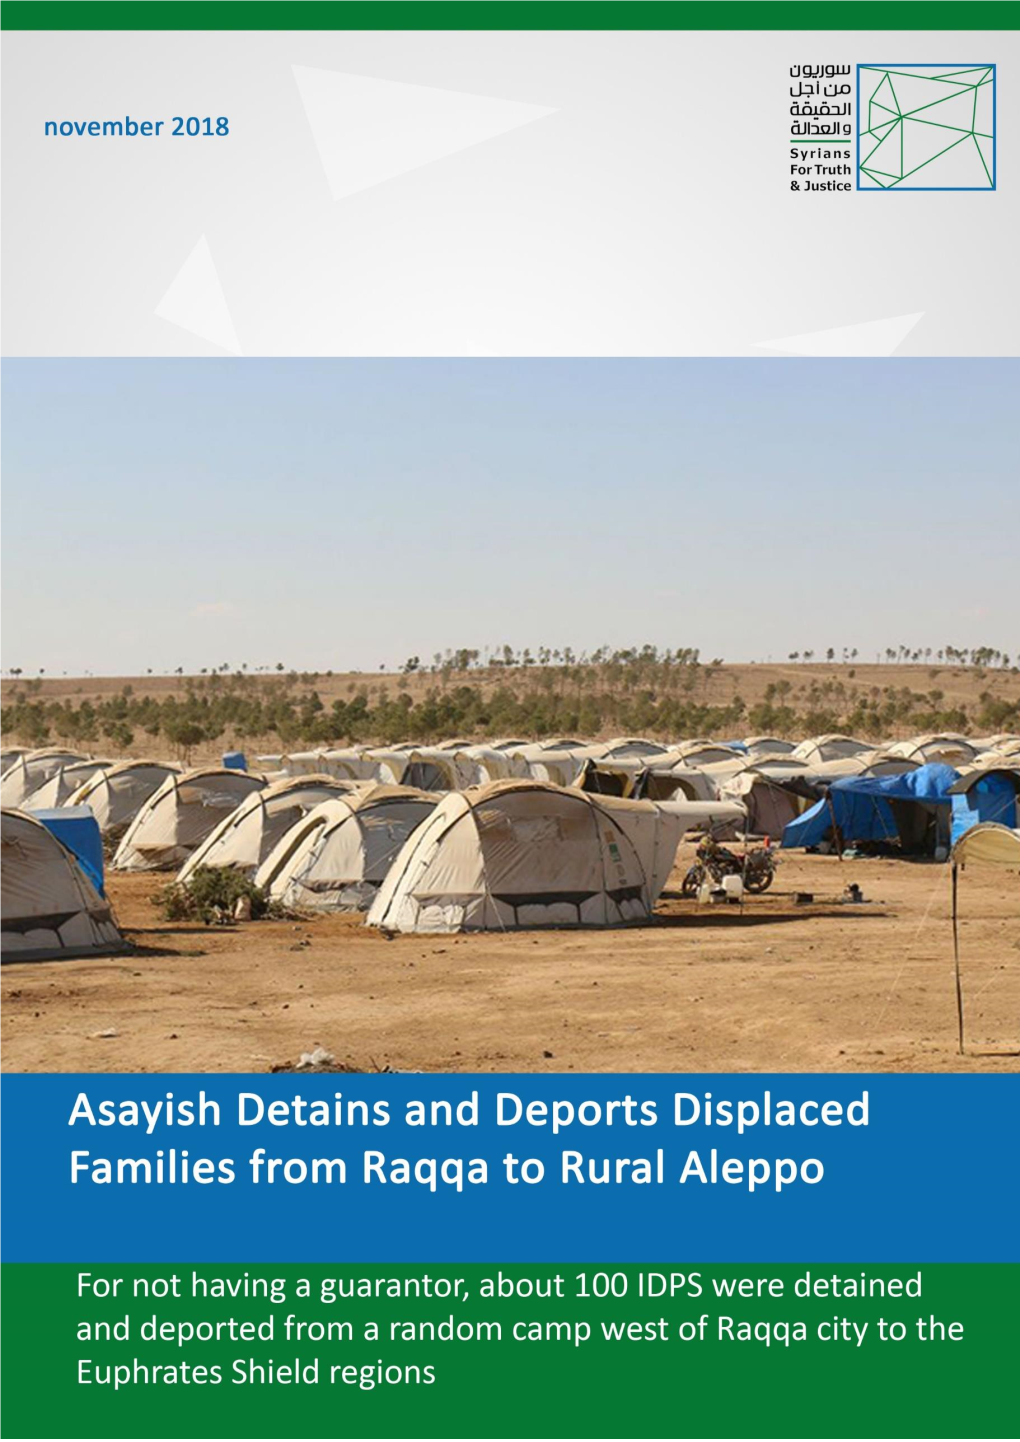 Asayish Detains and Deports Displaced Families from Raqqa to Rural Aleppo